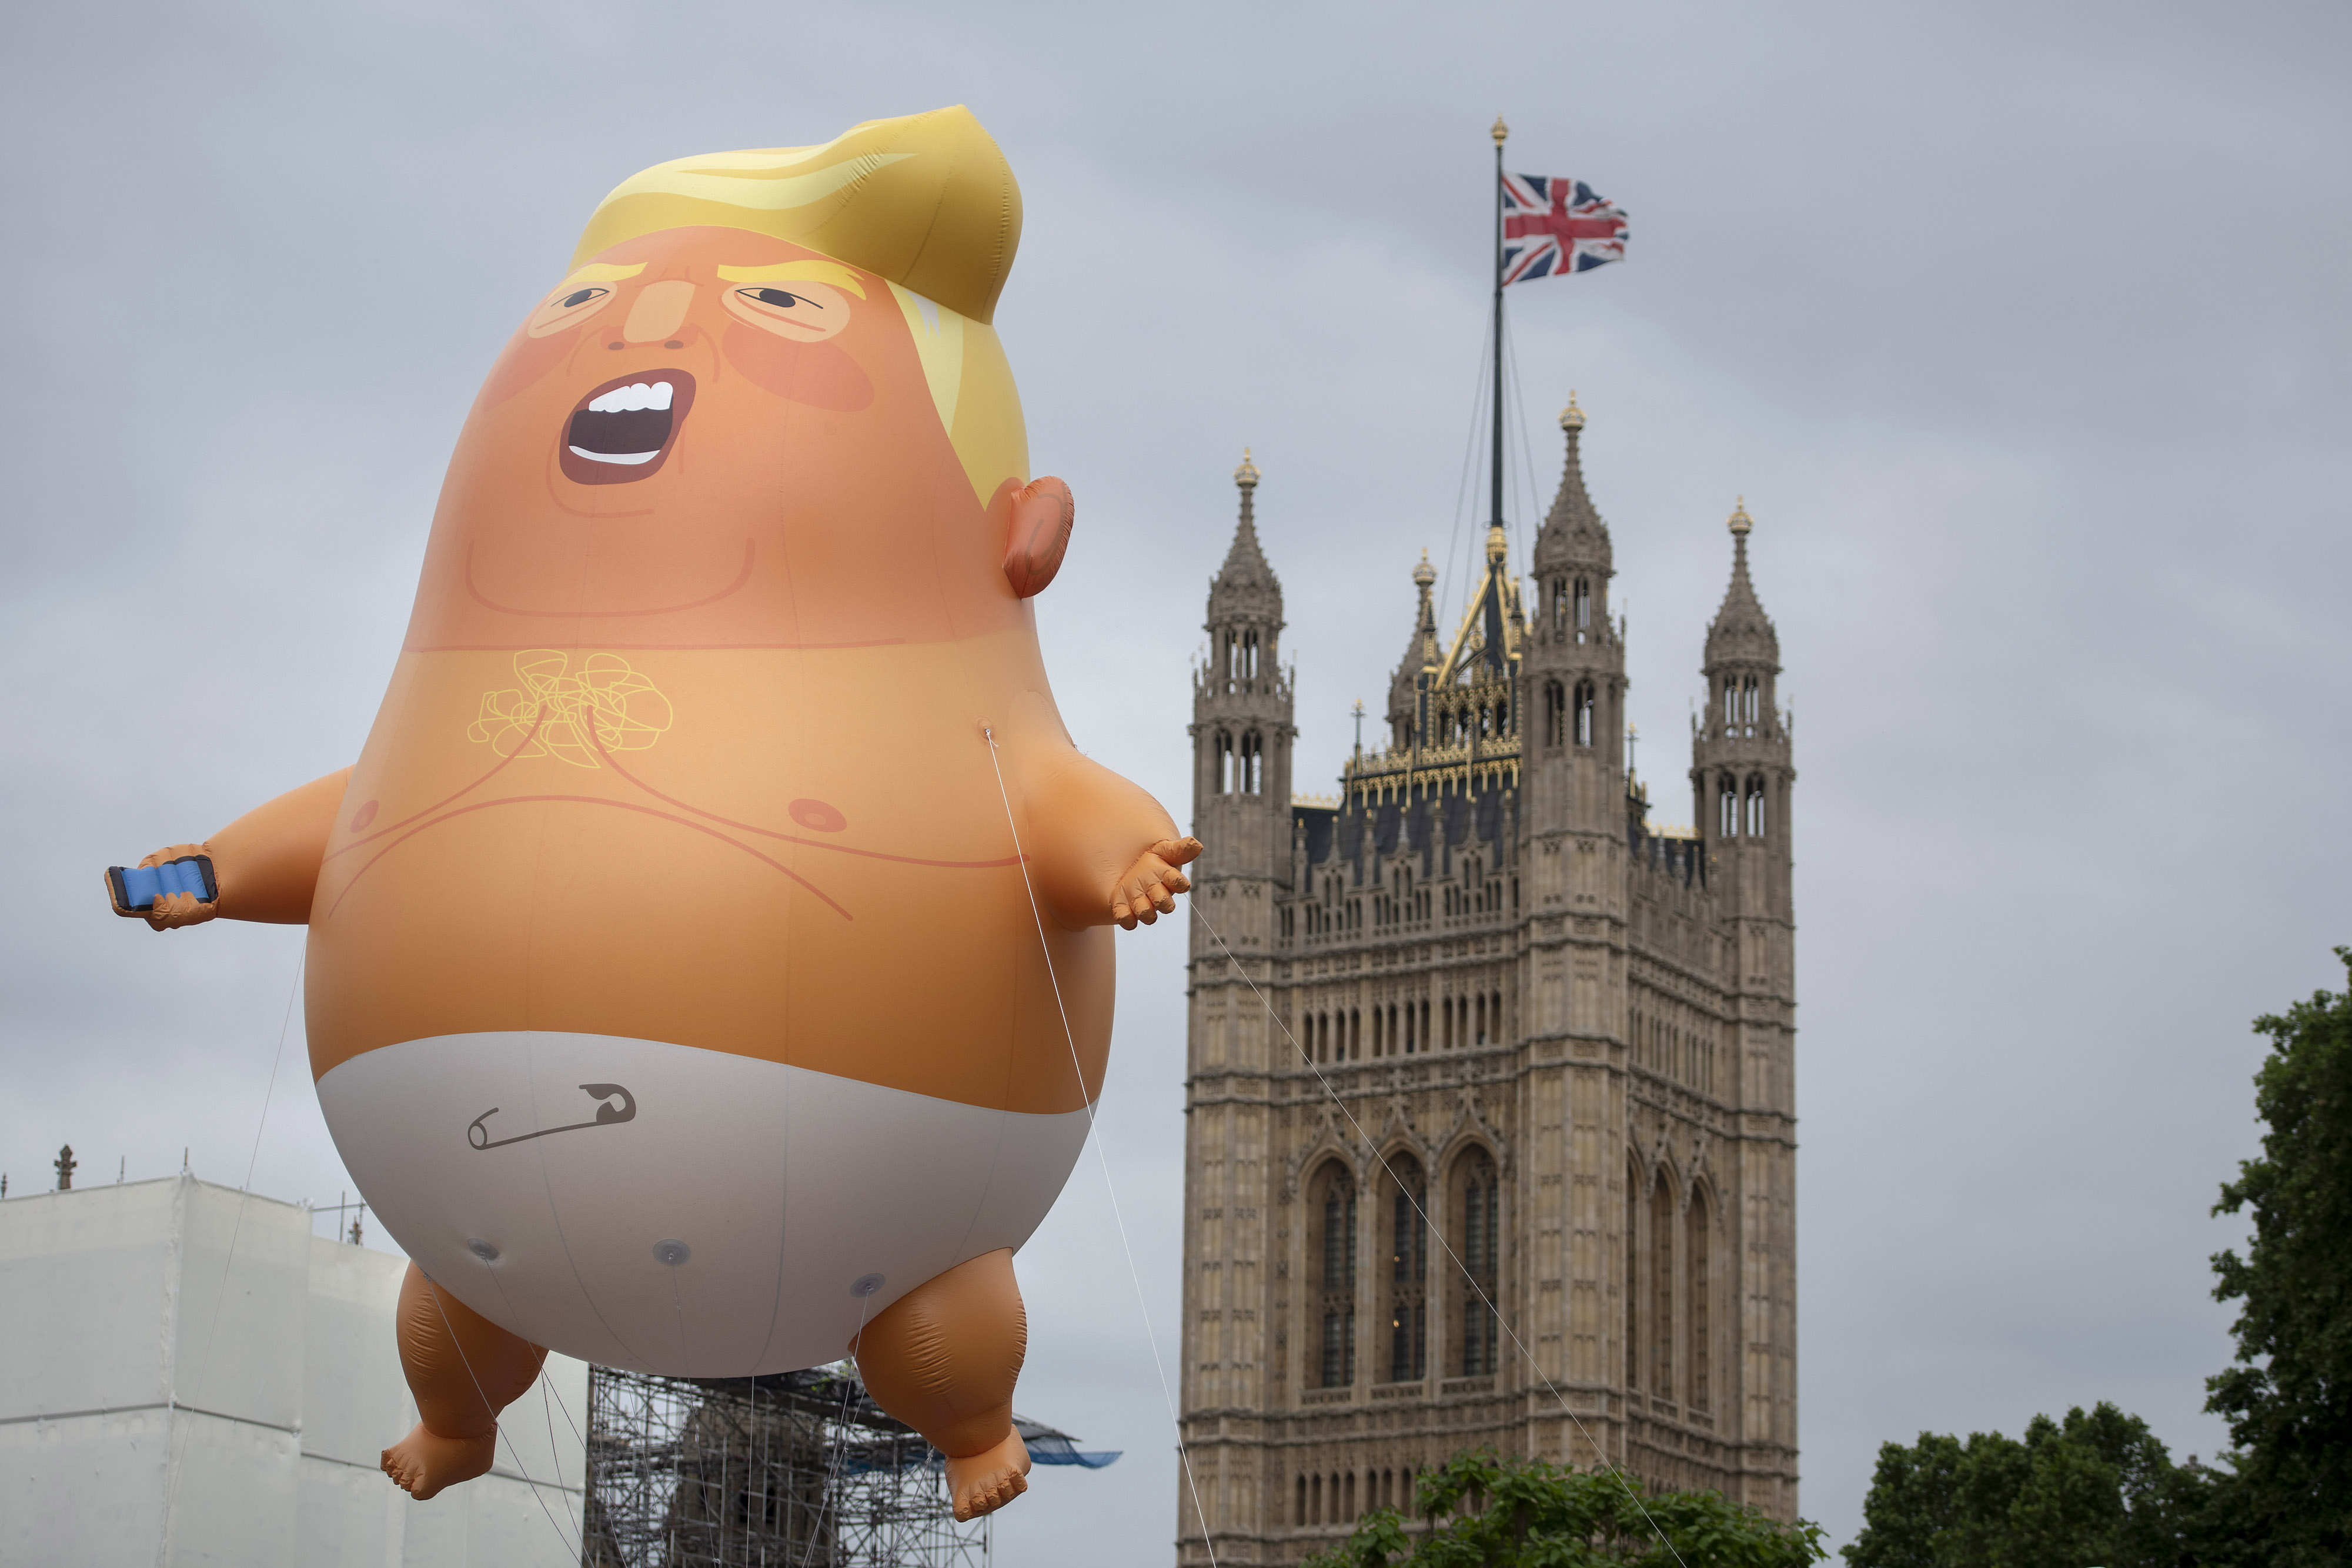 The Baby Trump Balloon is inflated in Parliament Square